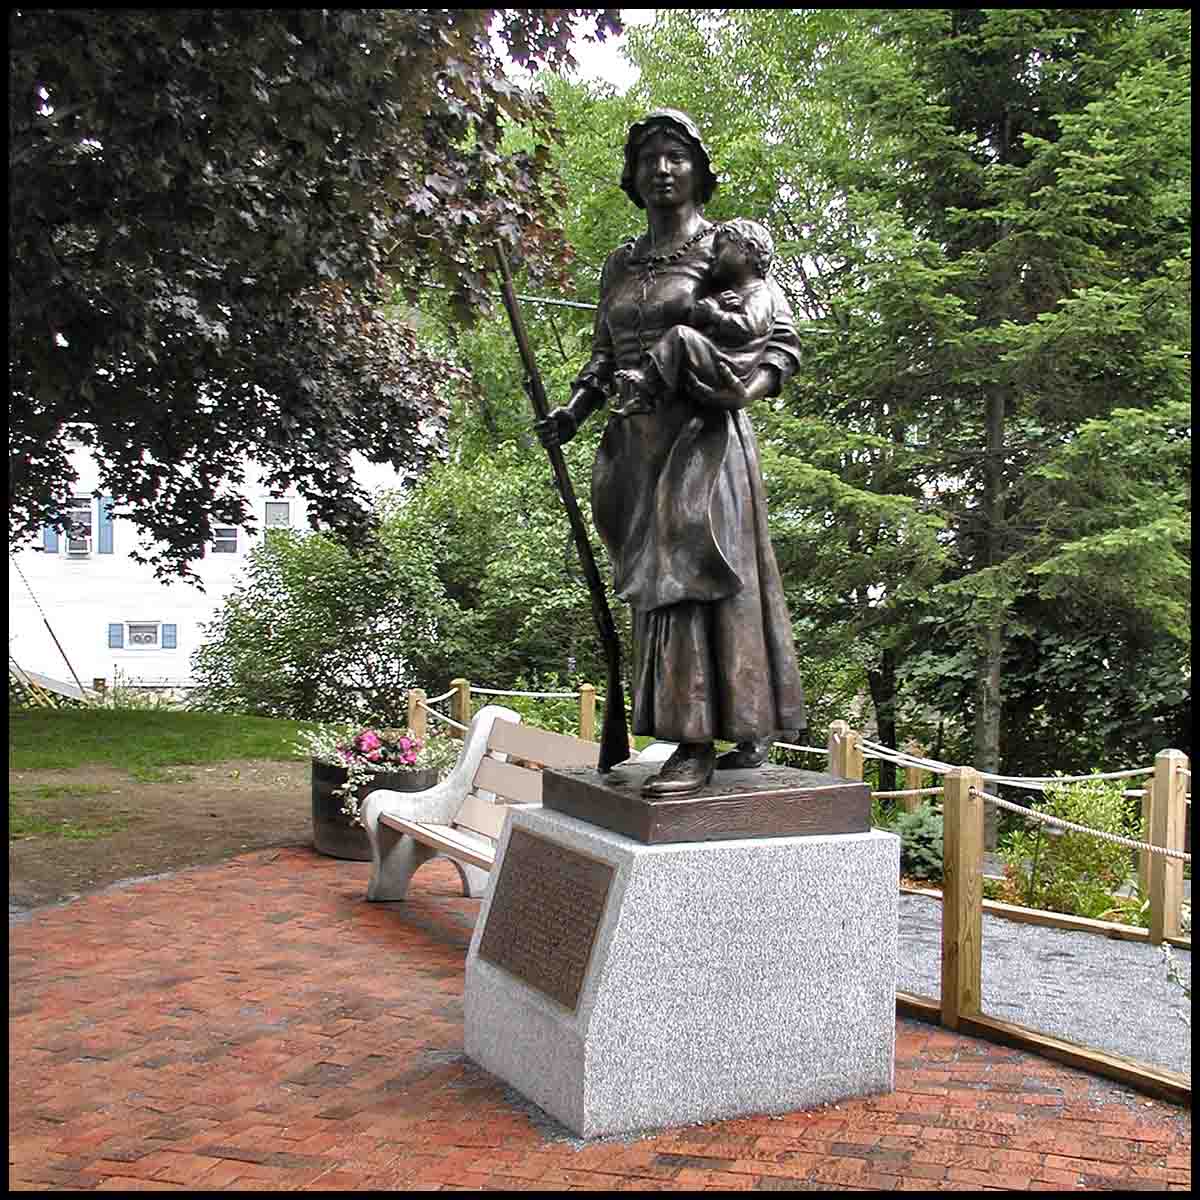 photo of bronze statue of Molly Stark holding child and musket atop stone base with plaque on a brick plaza with surrounding trees